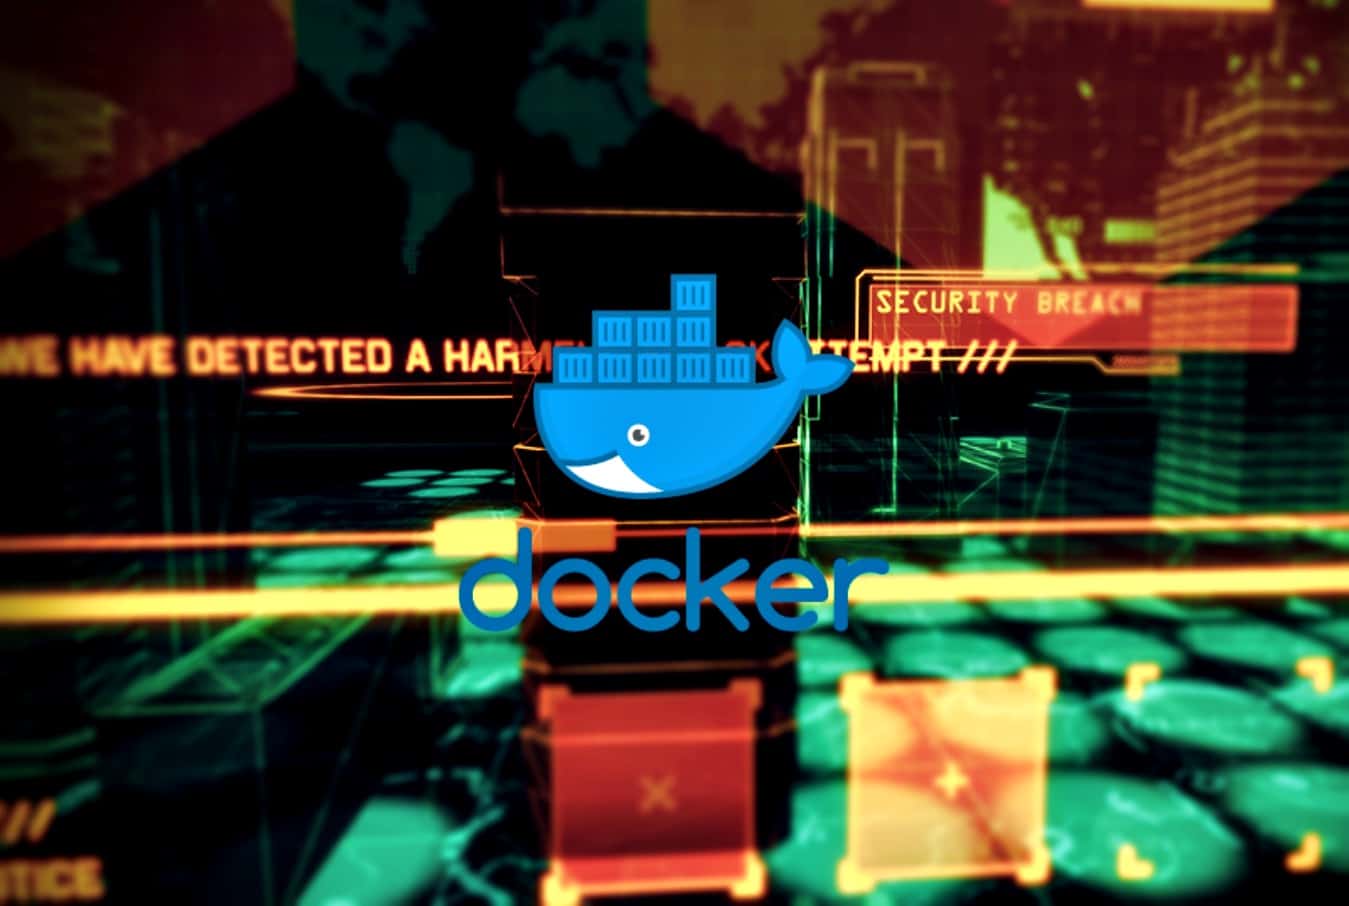 Change your password - Docker suffers breach; 190,000 users affected